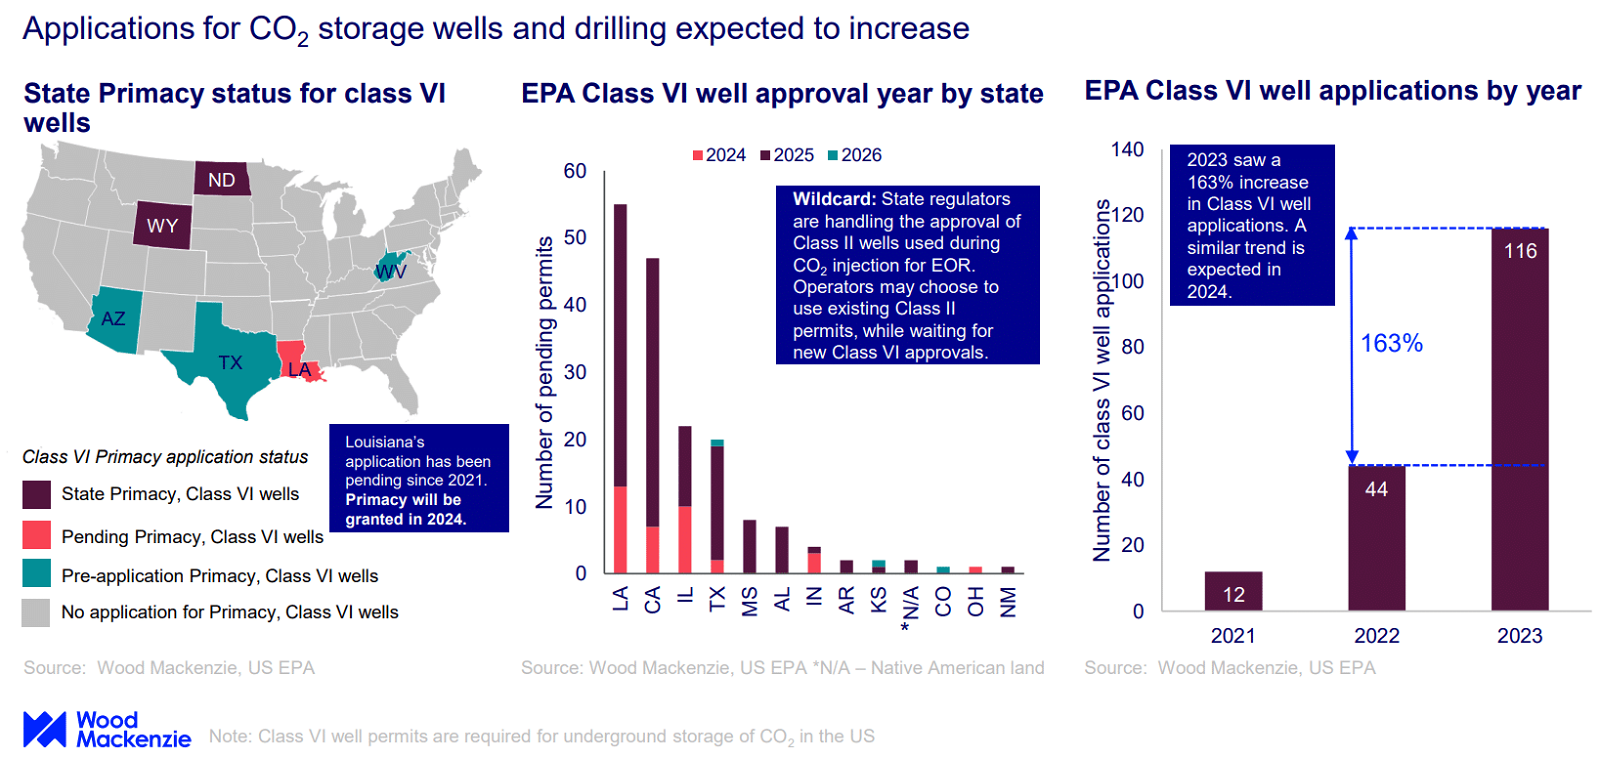 CCUS wells and drilling applications